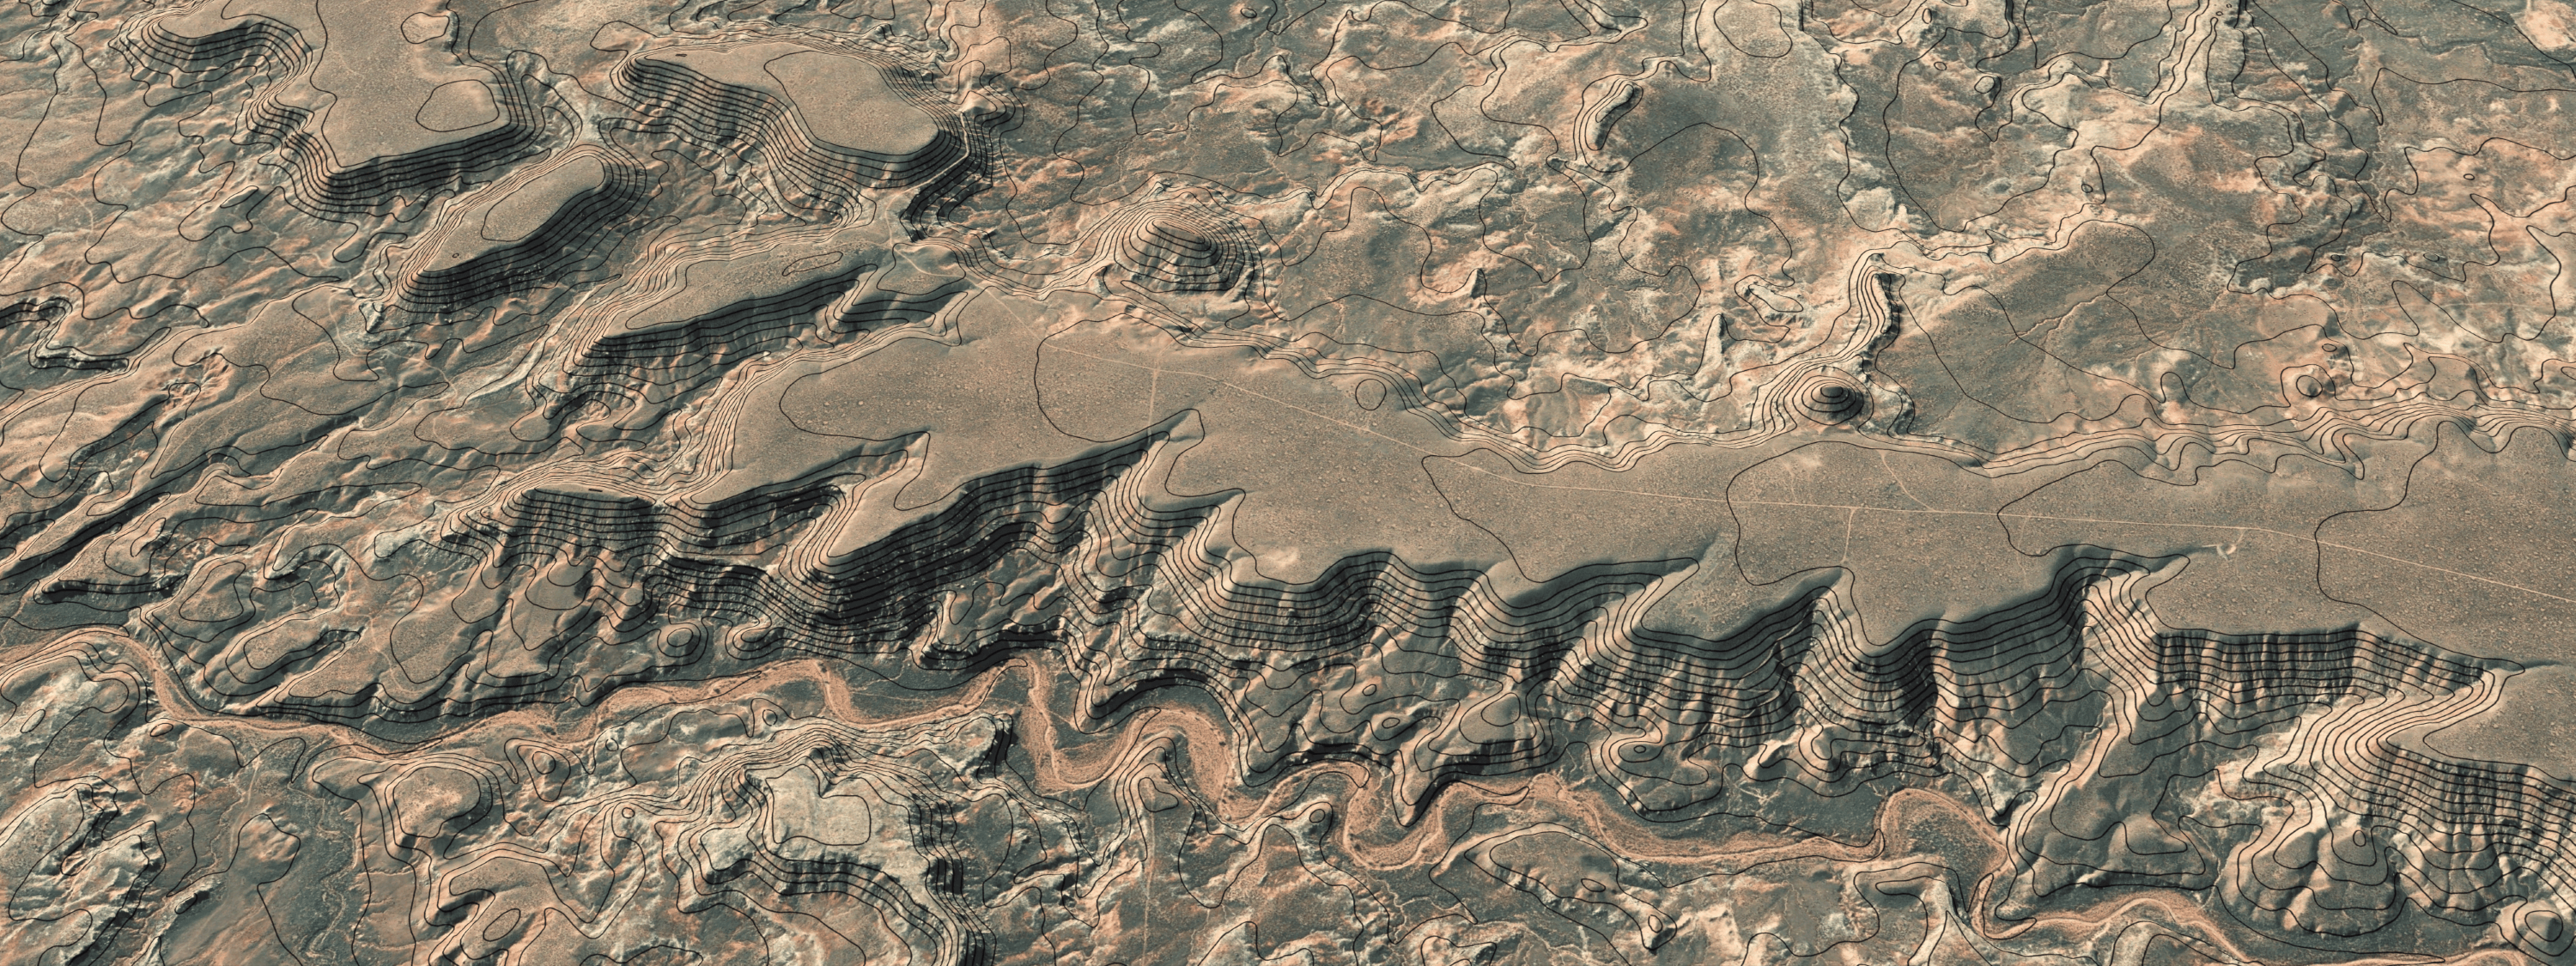 Terrain is accentuated by the contours in a 3D Scene of Halfway Hollow in Utah.